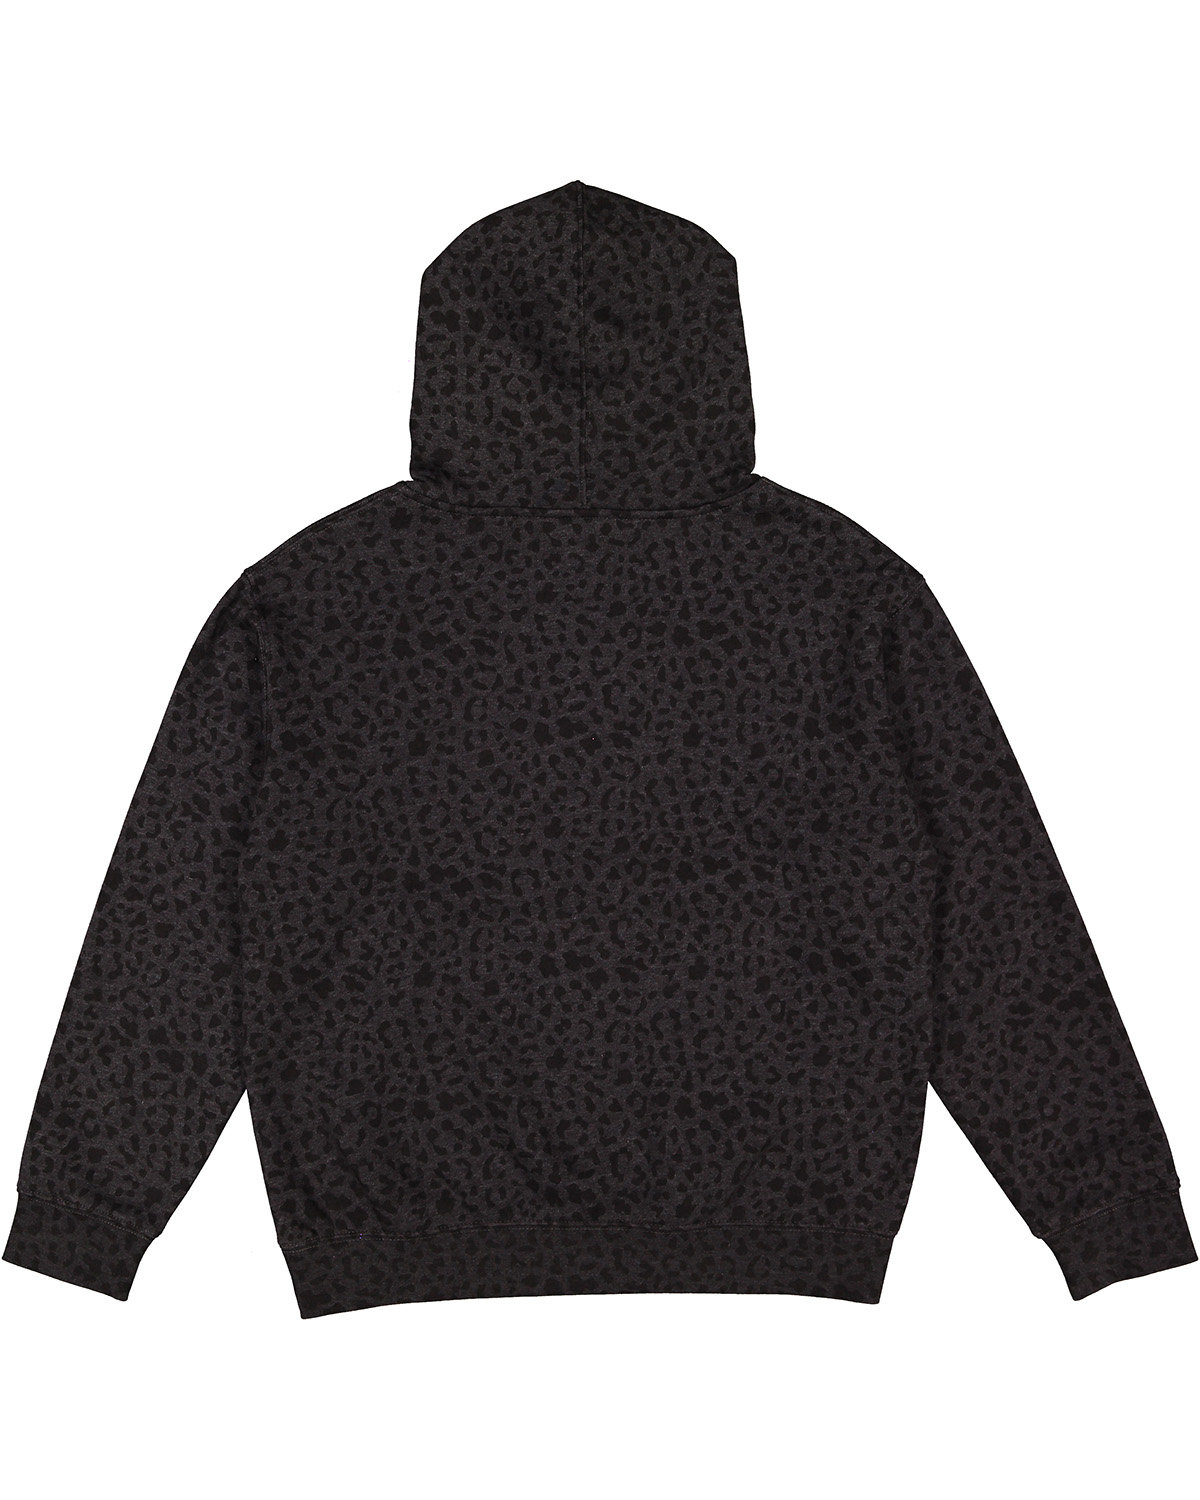 LAT Youth Pullover Fleece Hoodie | alphabroder